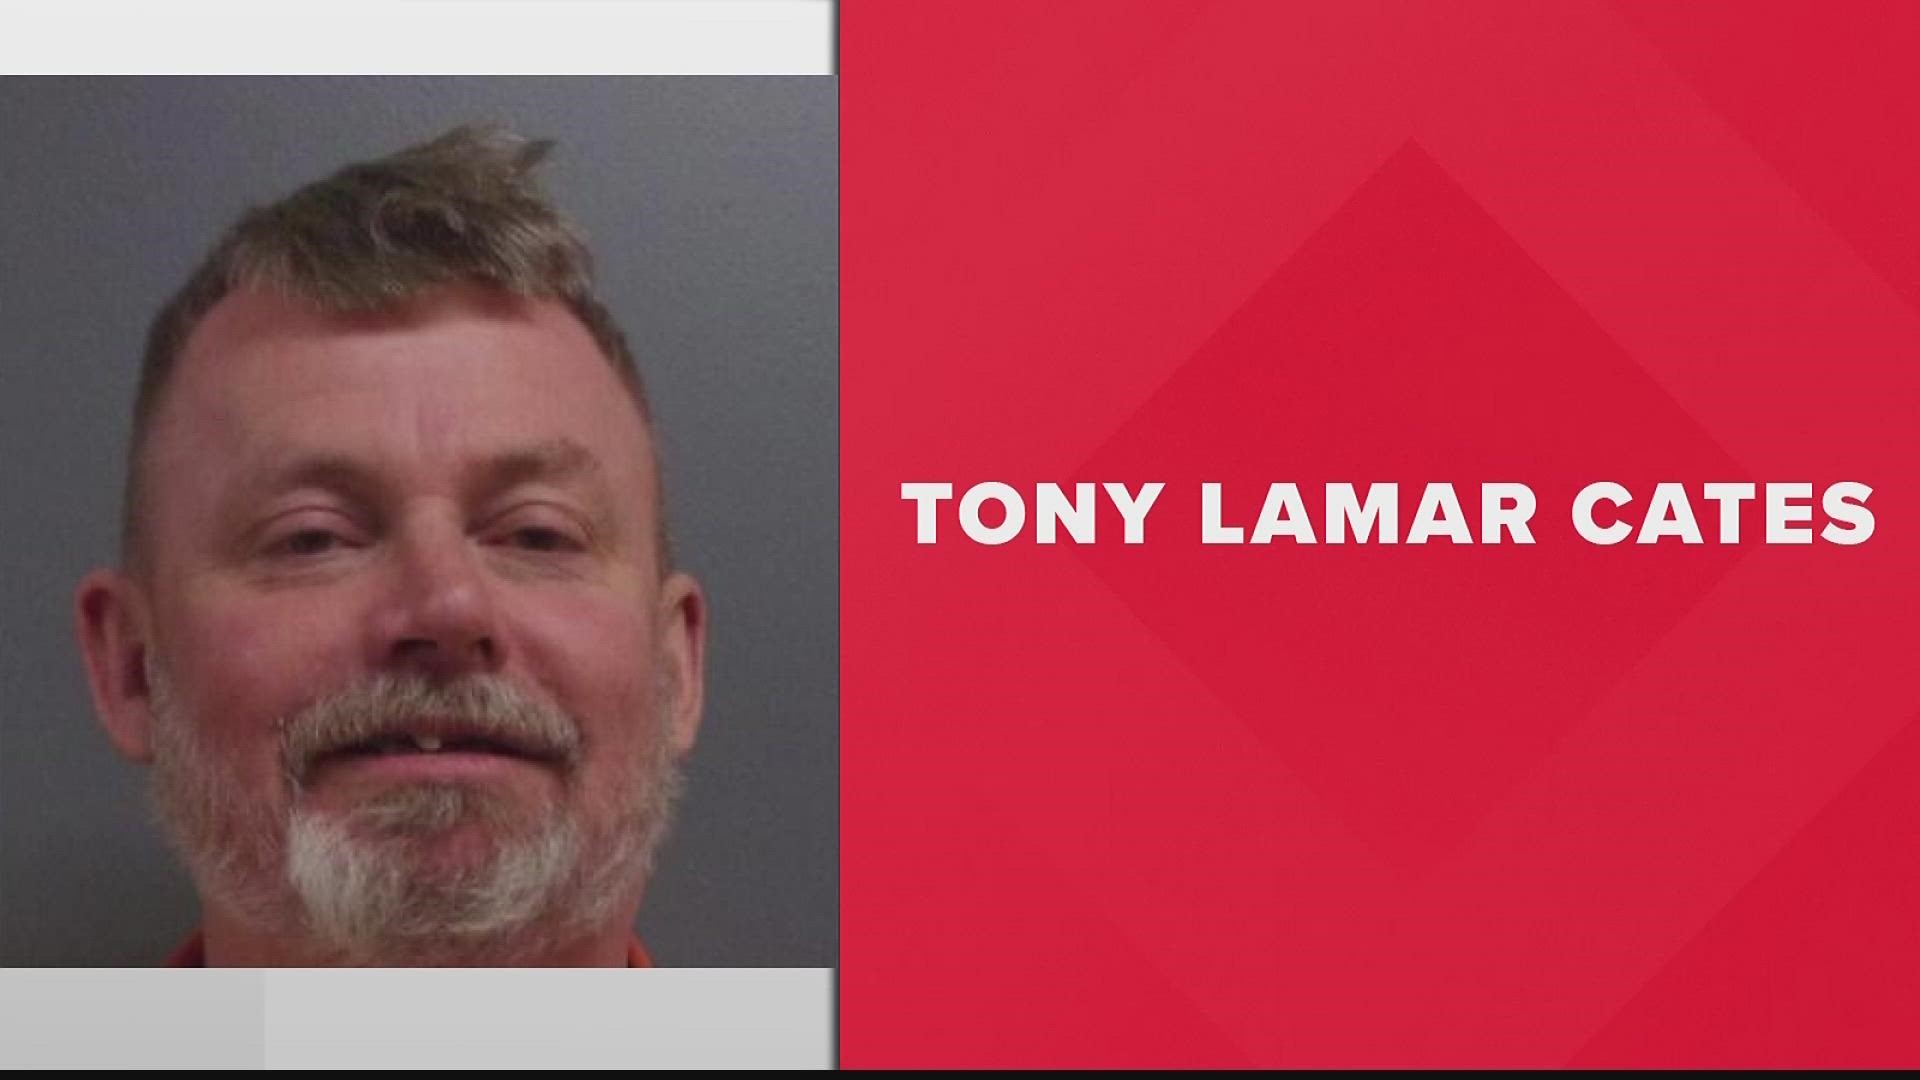 Authorities said this may be related to the missing person case surrounding Tony Lamar Cates.